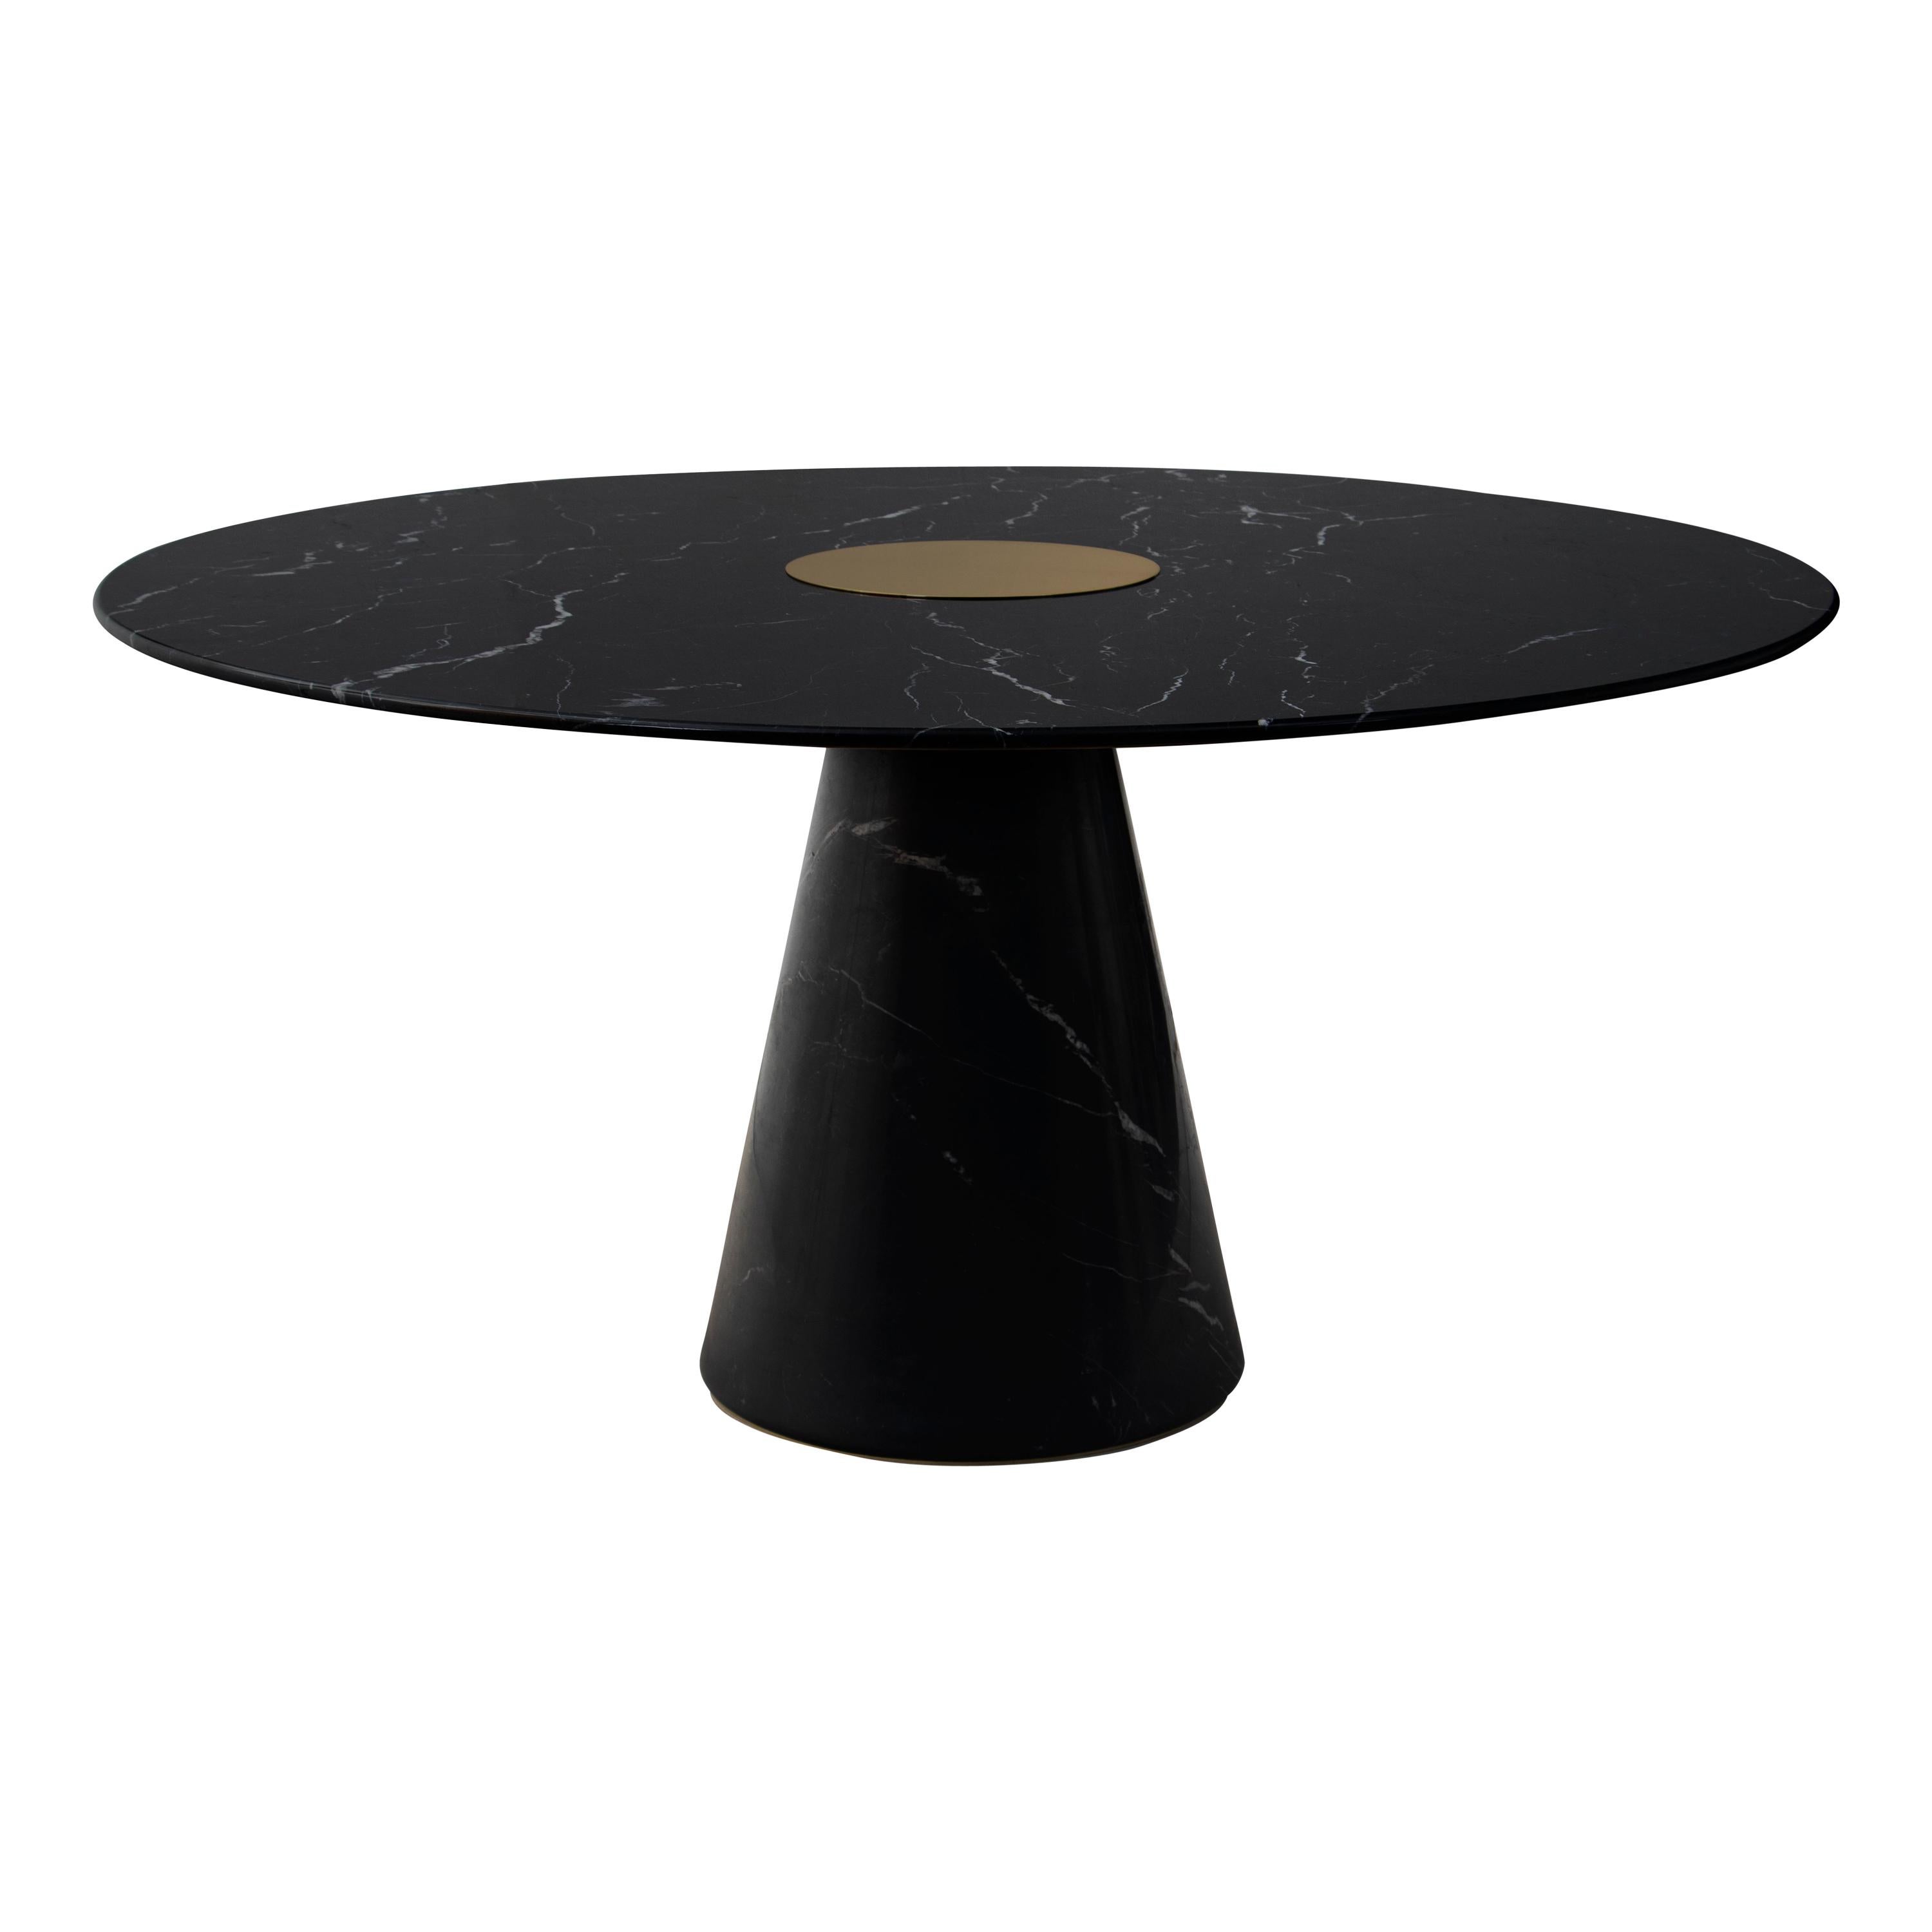 Bertoia Round Dining Table in Polished Nero Marquina Marble For Sale